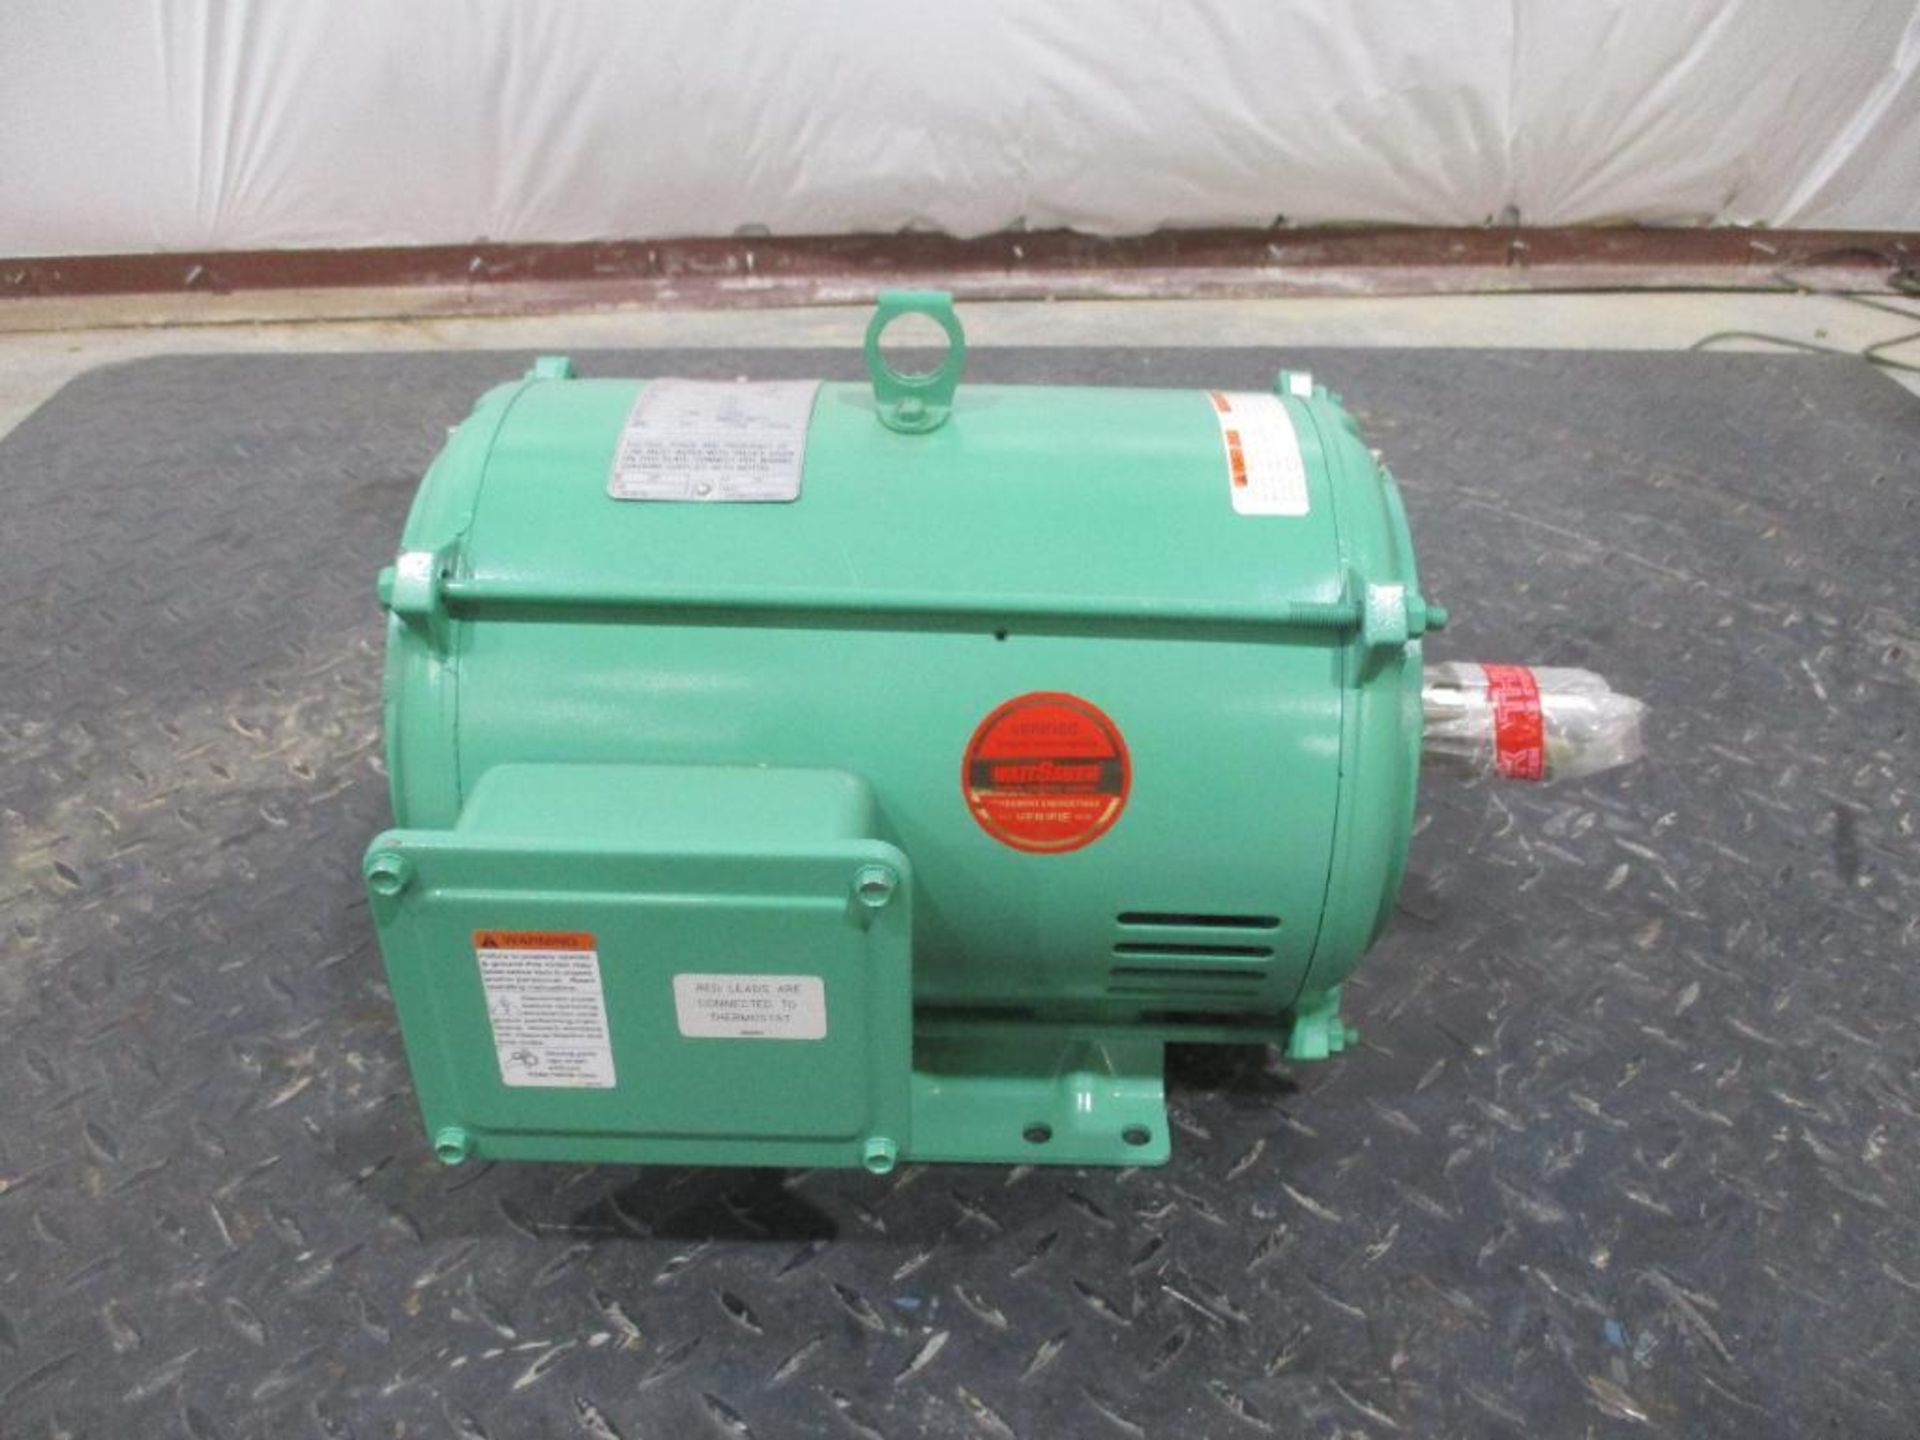 LINCLON MOTORS 3 PHASE 7 1/2HP 1515/2910RPM 213T FRAME A/C MOTOR P/N LM32740A, 103# lbs (There will